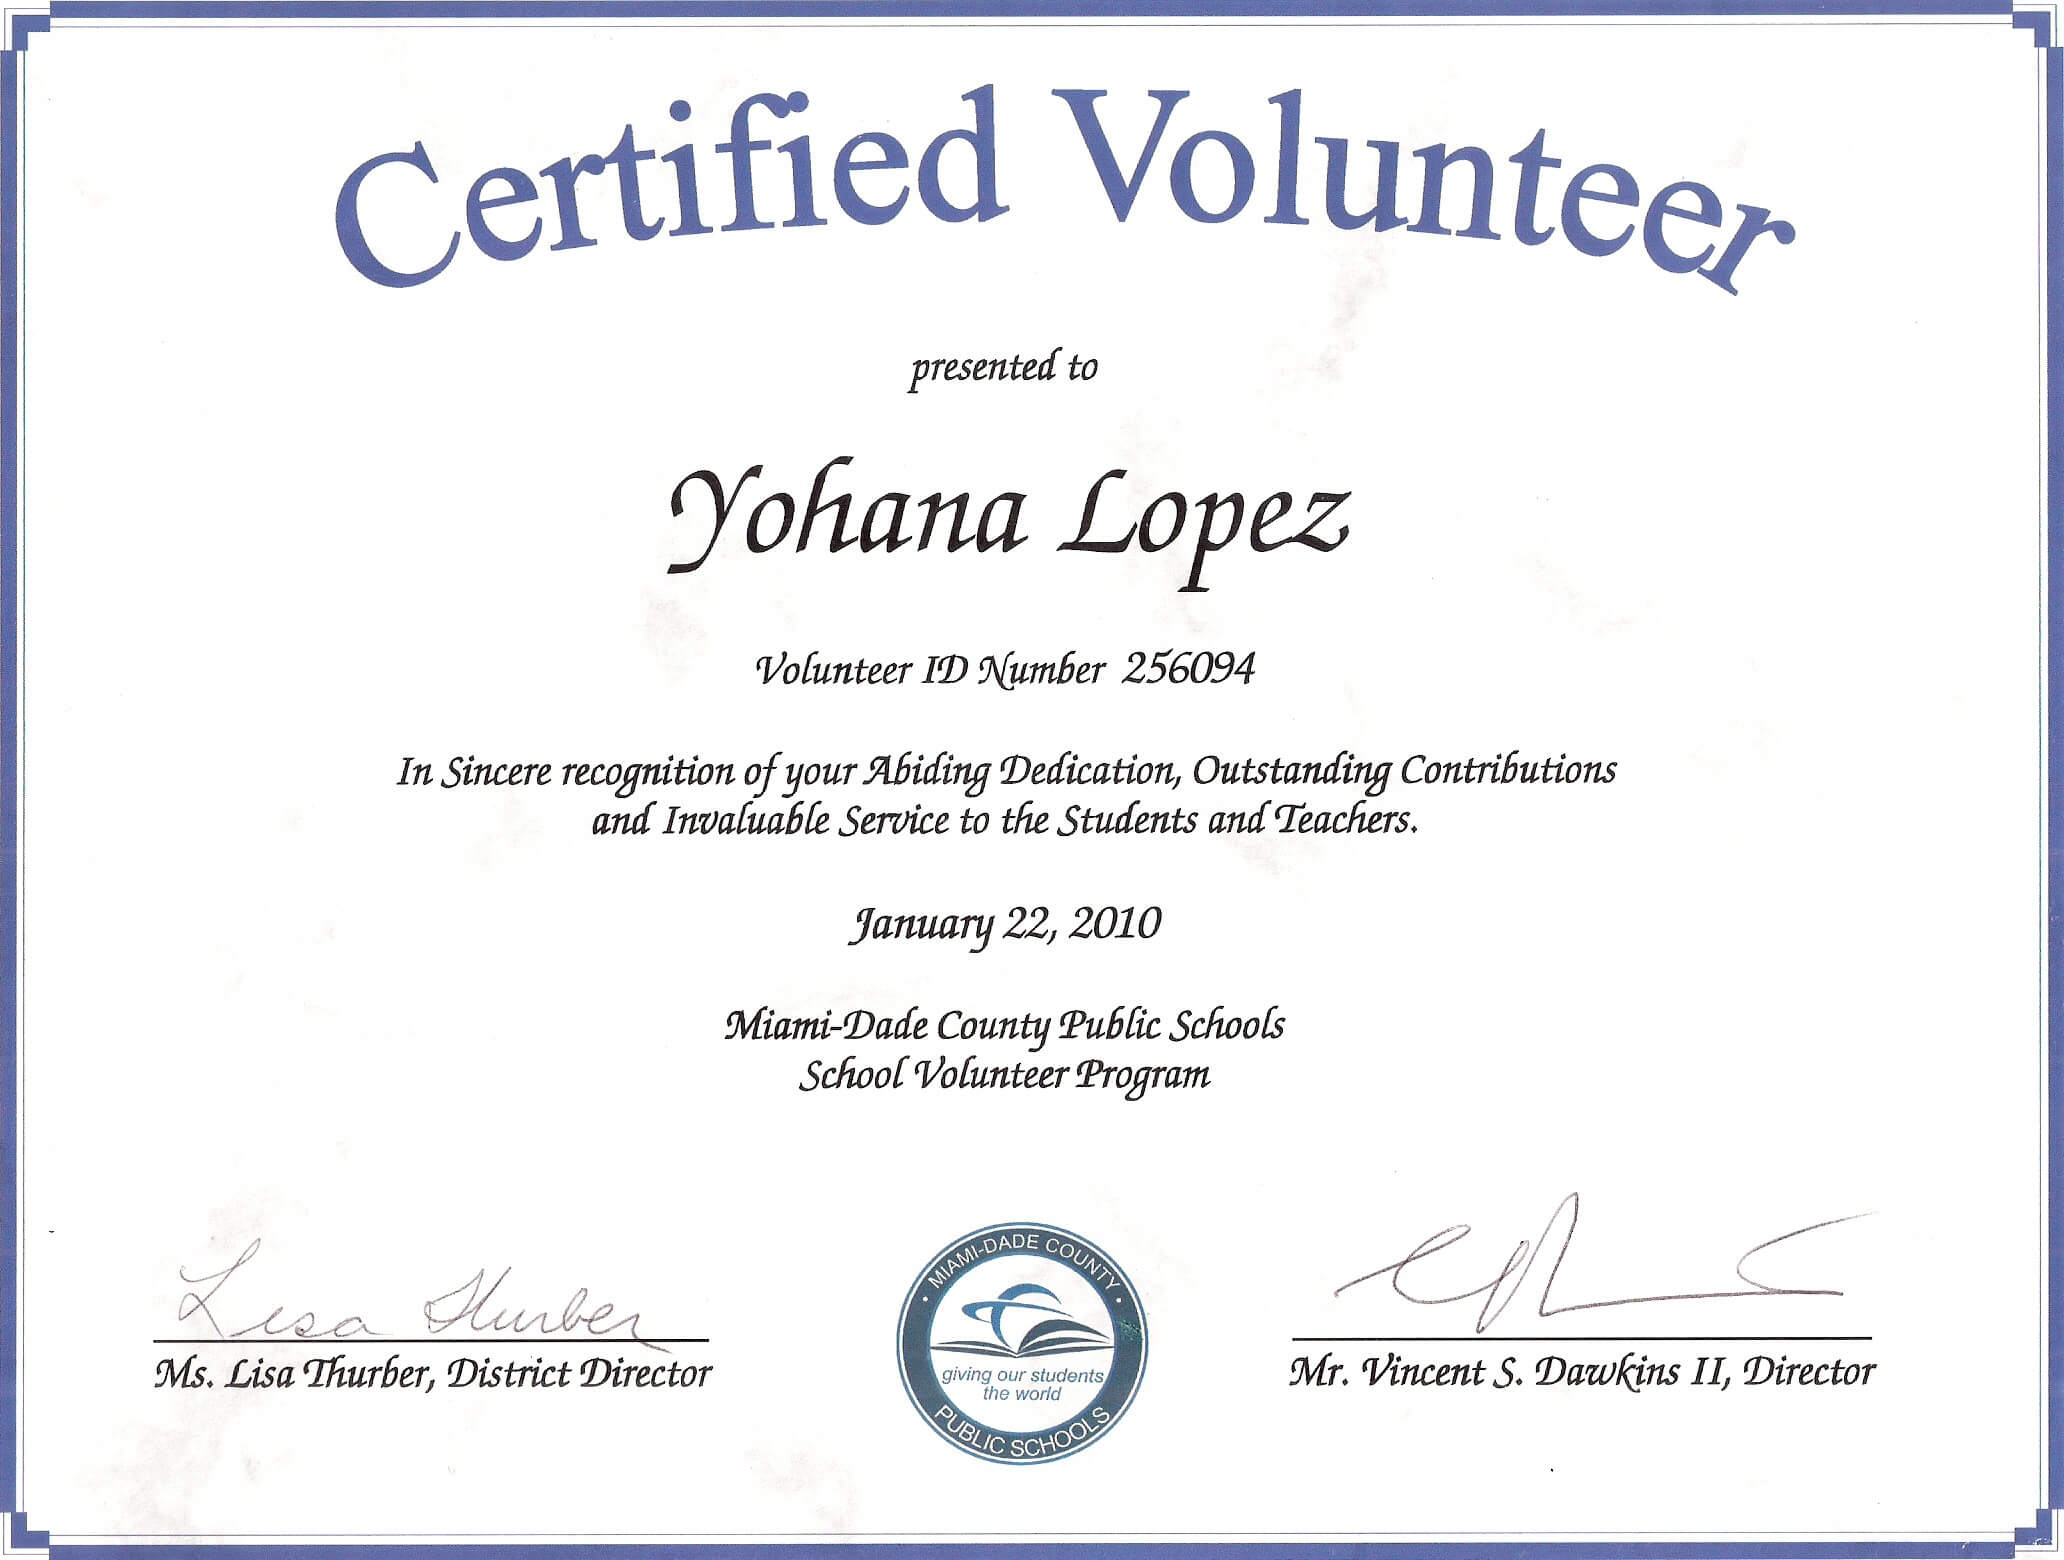 Recognition Certificate Template ] – Certificate Football With Volunteer Certificate Templates